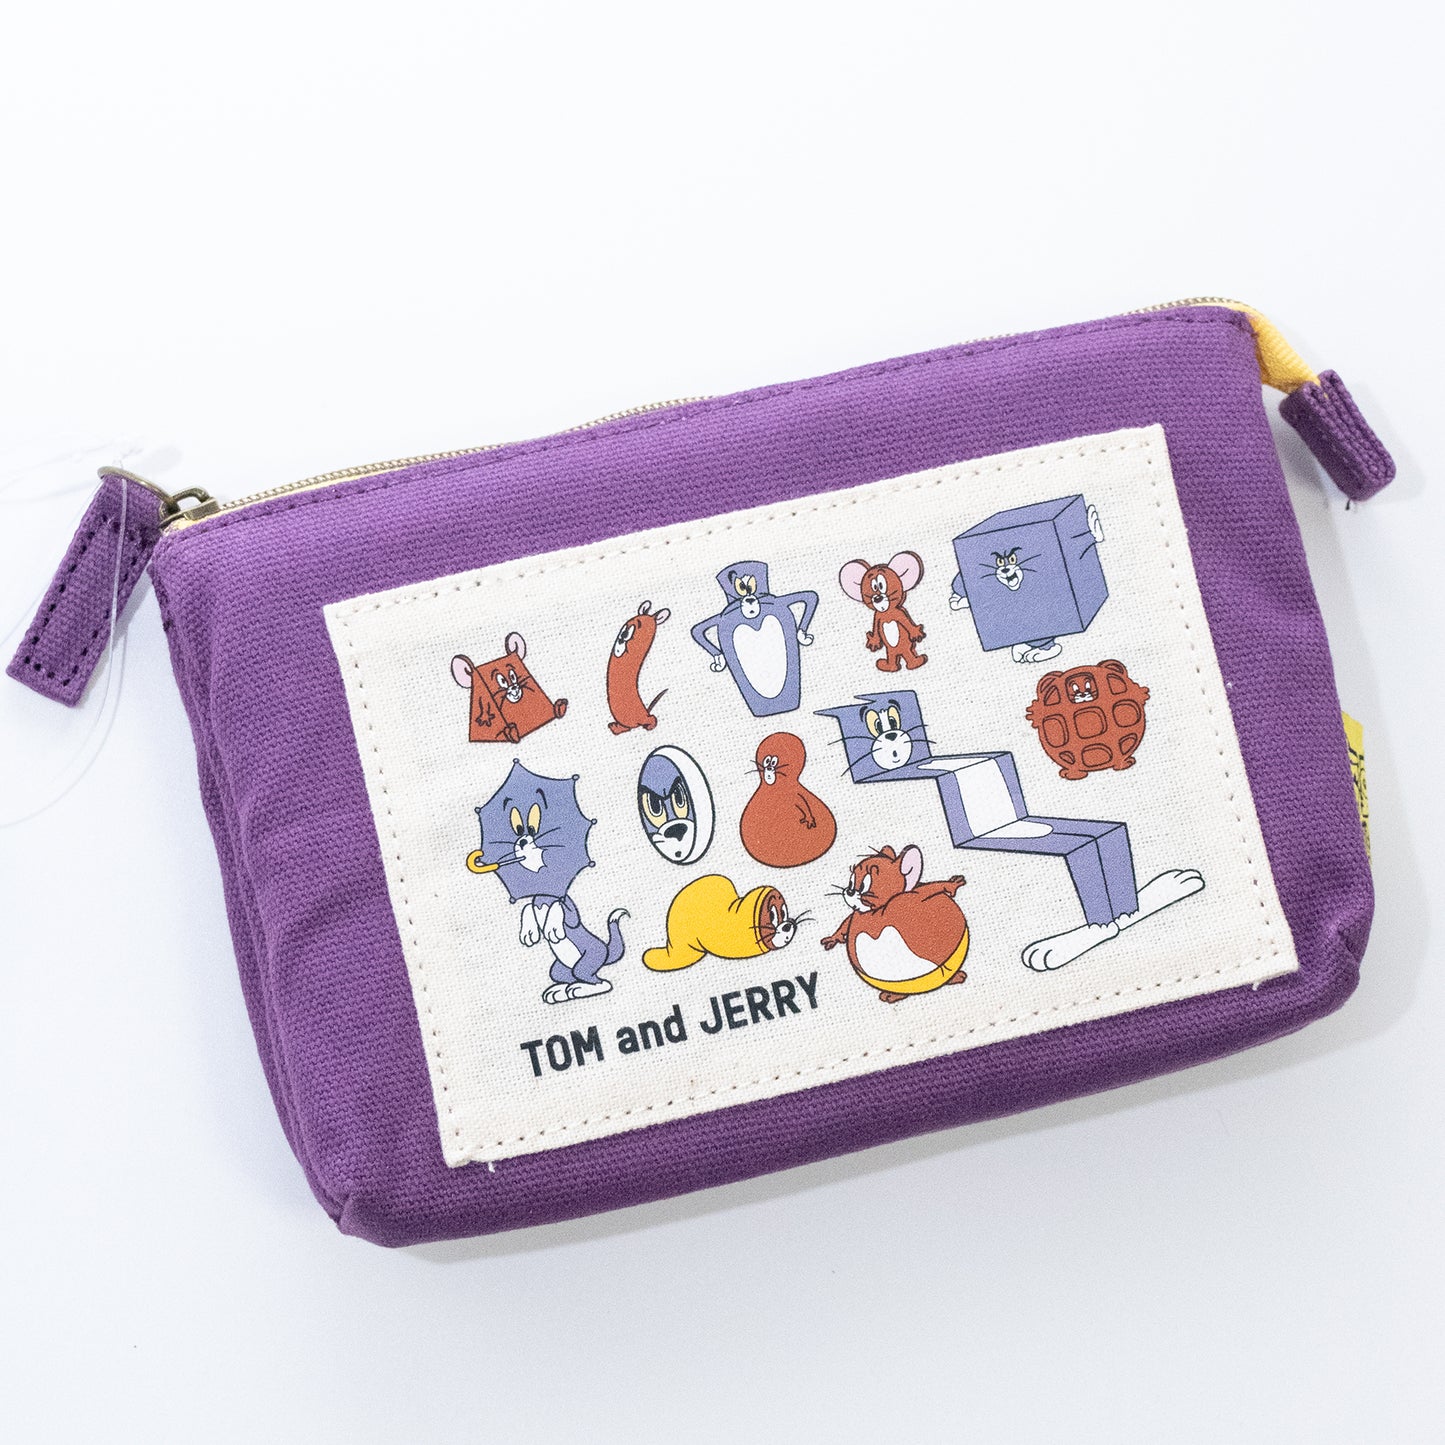 TOM and JERRY Canvas Pouch (4 color) - YOUAREMYPOISON